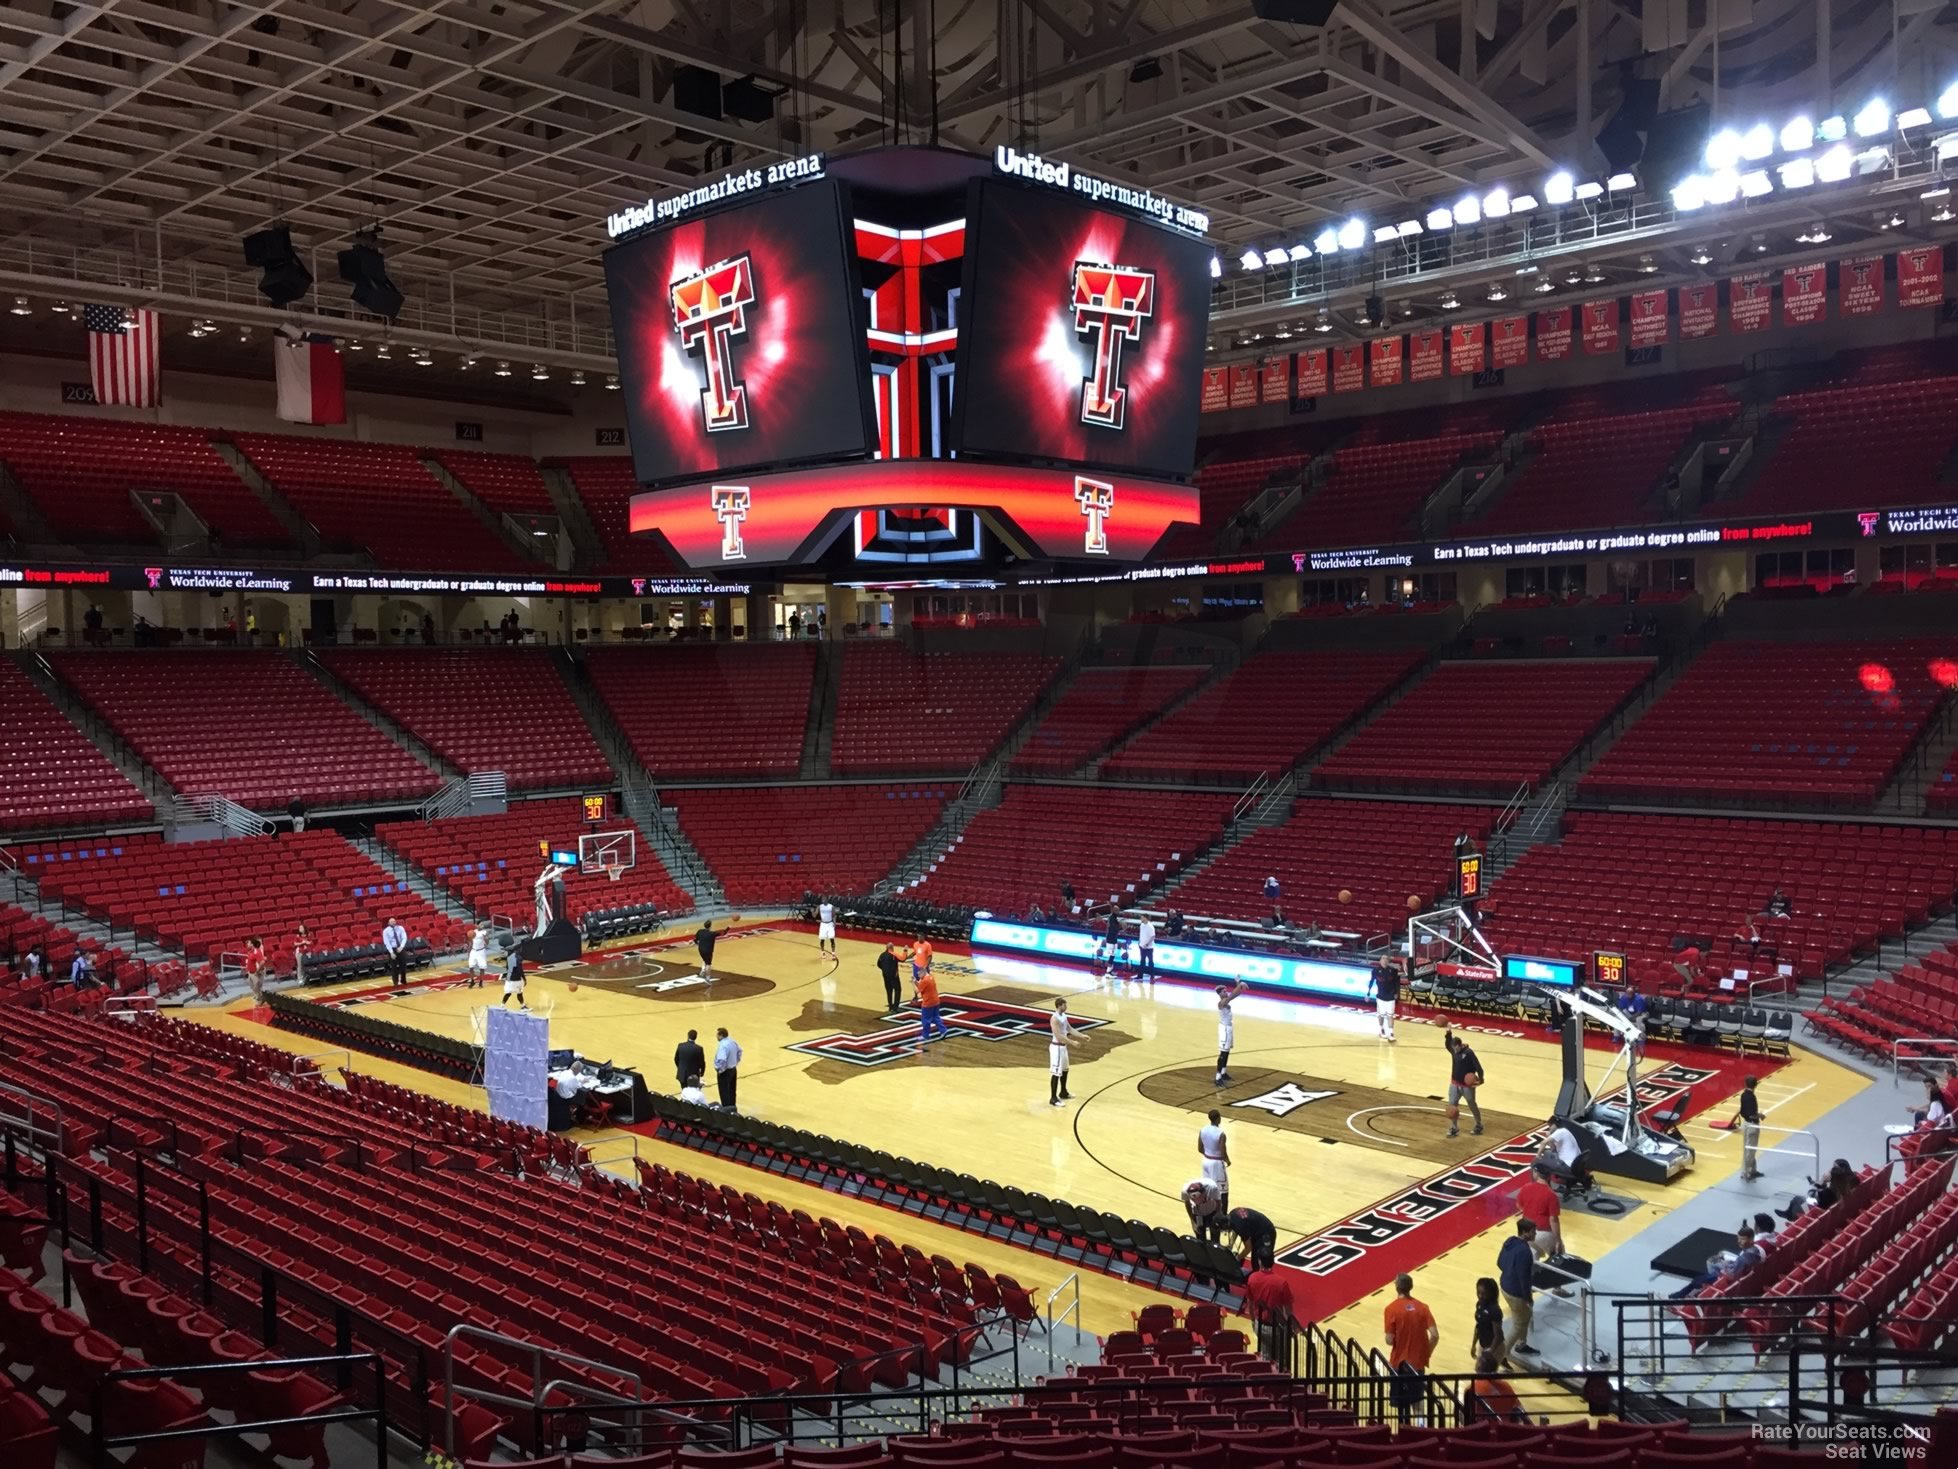 section 122, row 25 seat view  - united supermarkets arena